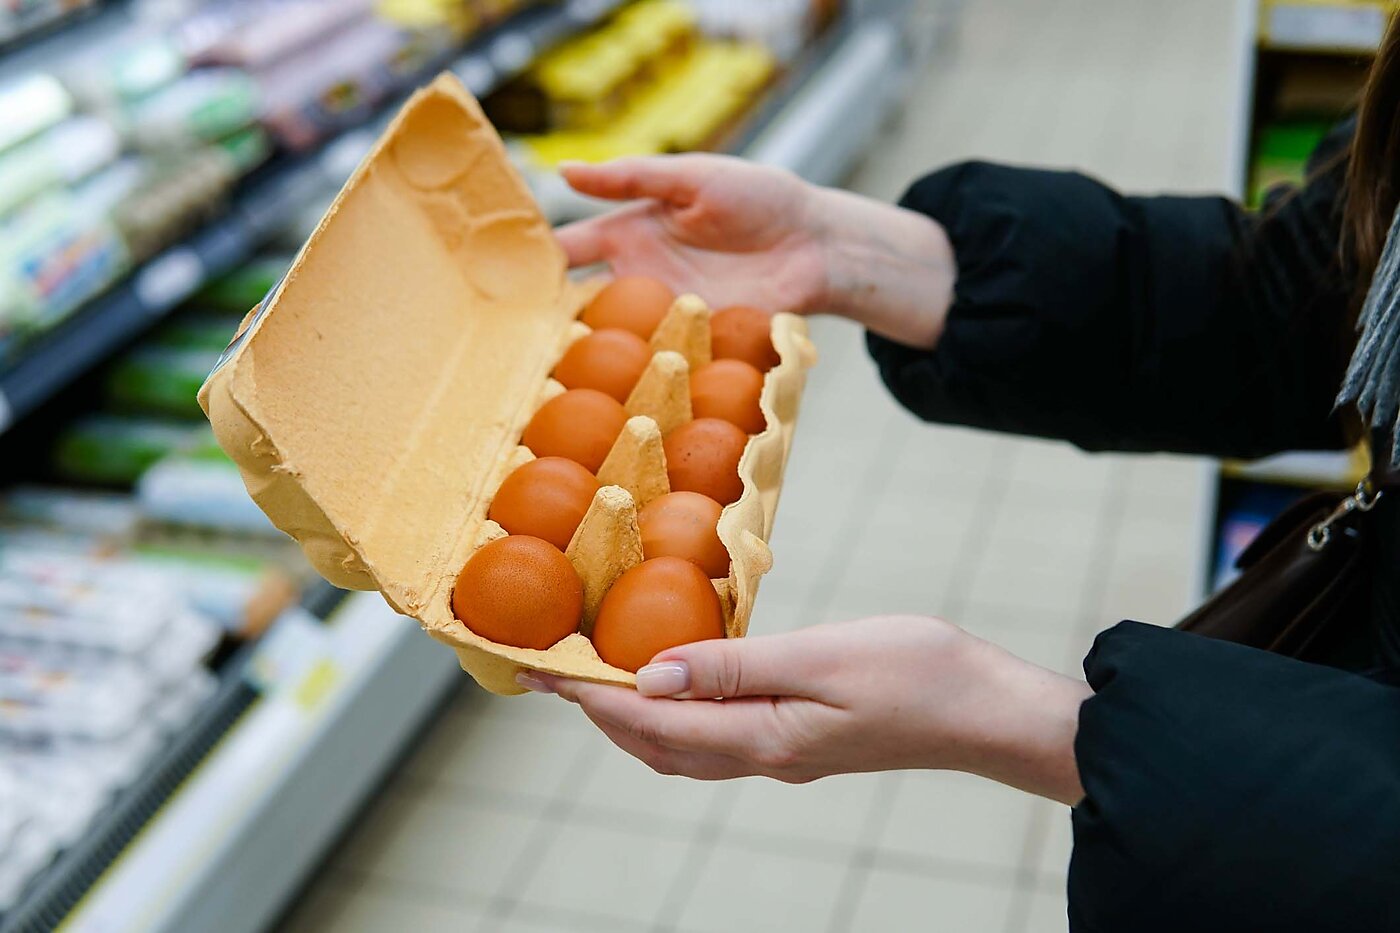 Woman holding a dozen eggs, package open to inspect the eggs.